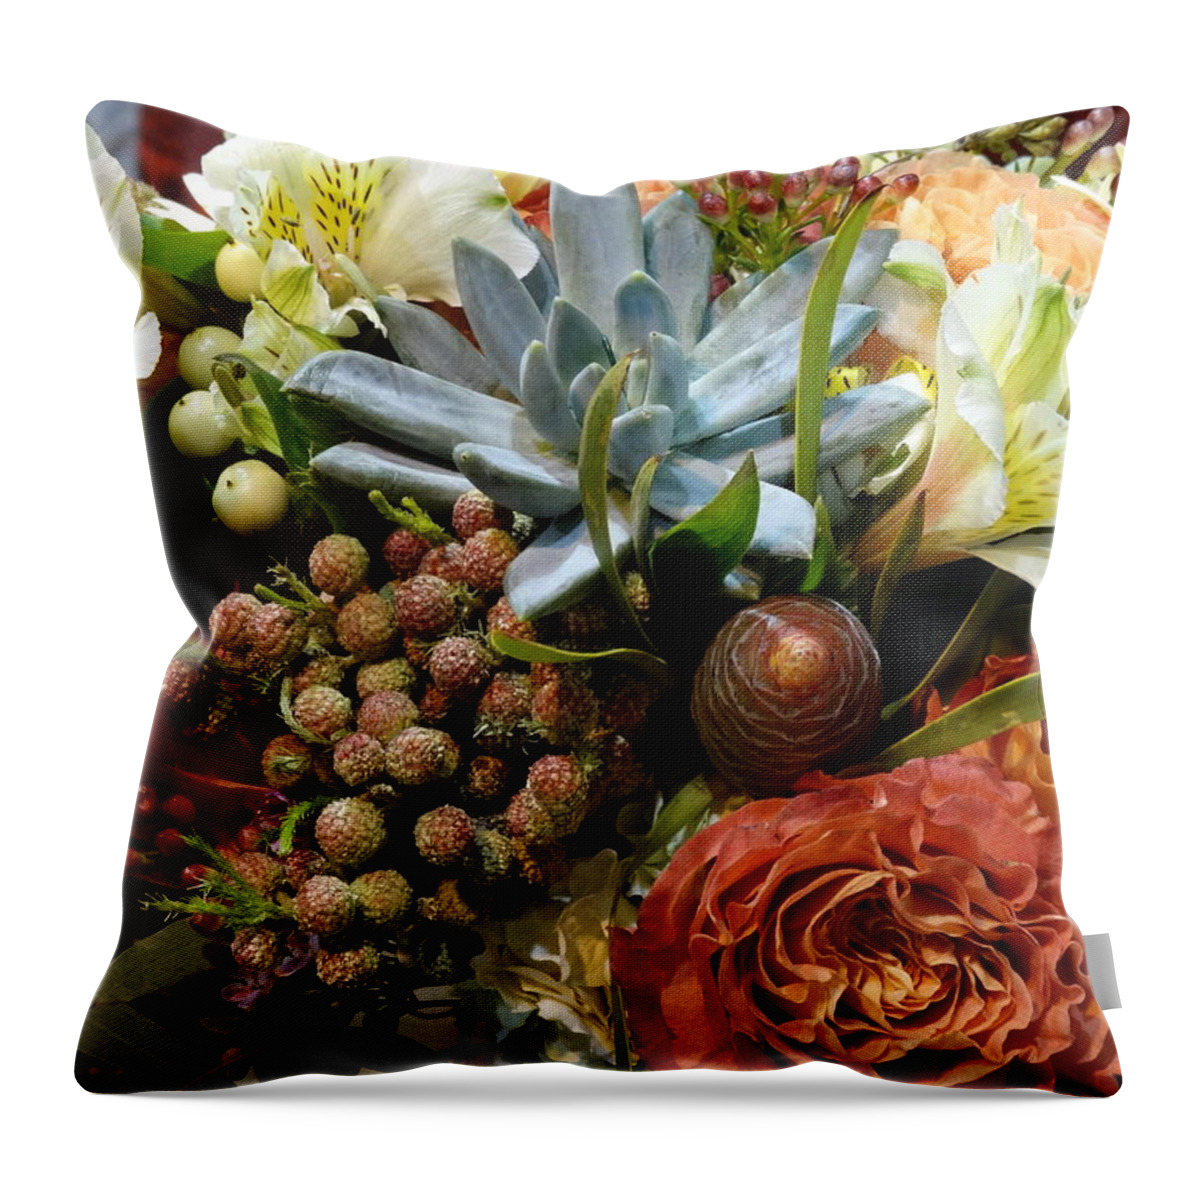 Flowers Throw Pillow featuring the photograph Floral Arrangement 1 #1 by David T Wilkinson